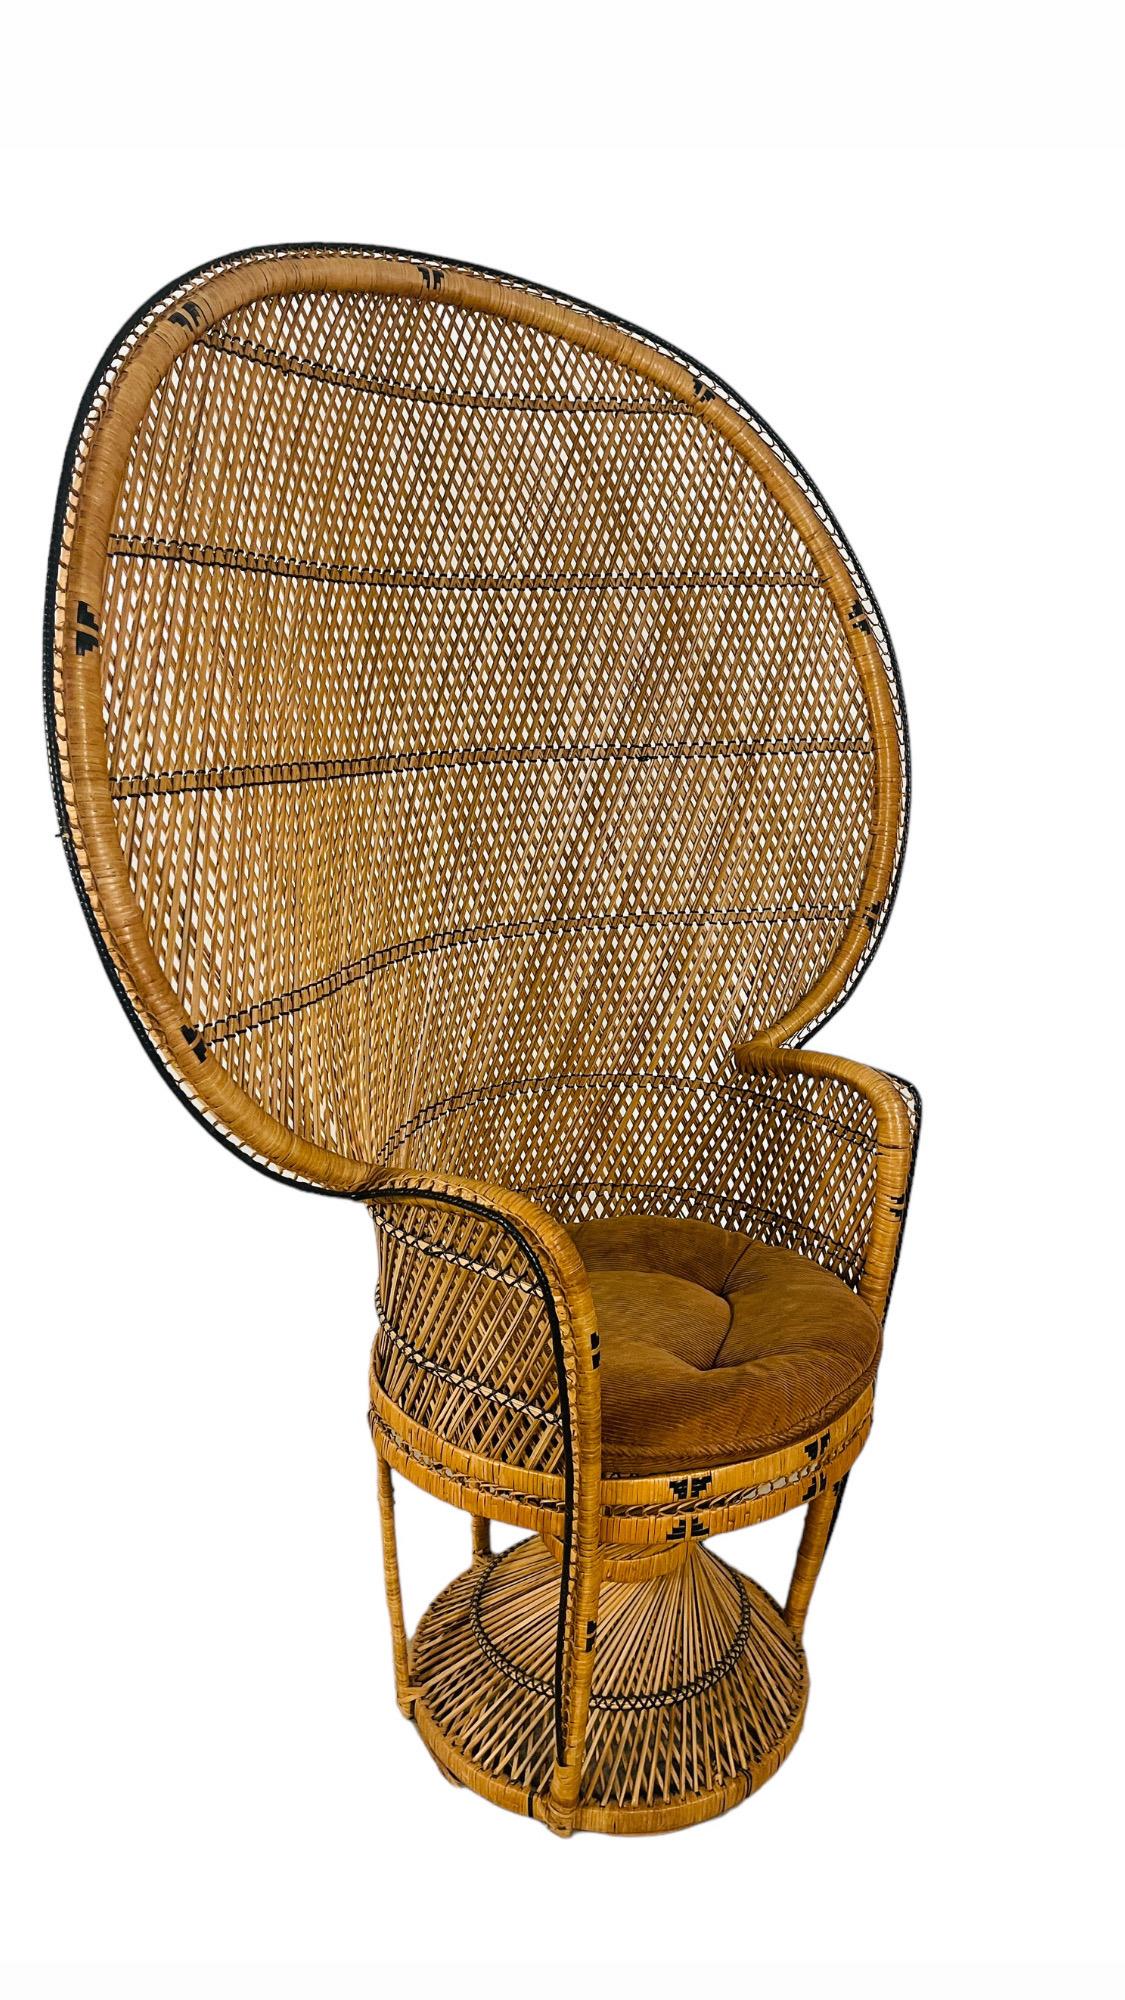 Vintage Boho Chic Wicker, Rattan Peacock Chair For Sale 3